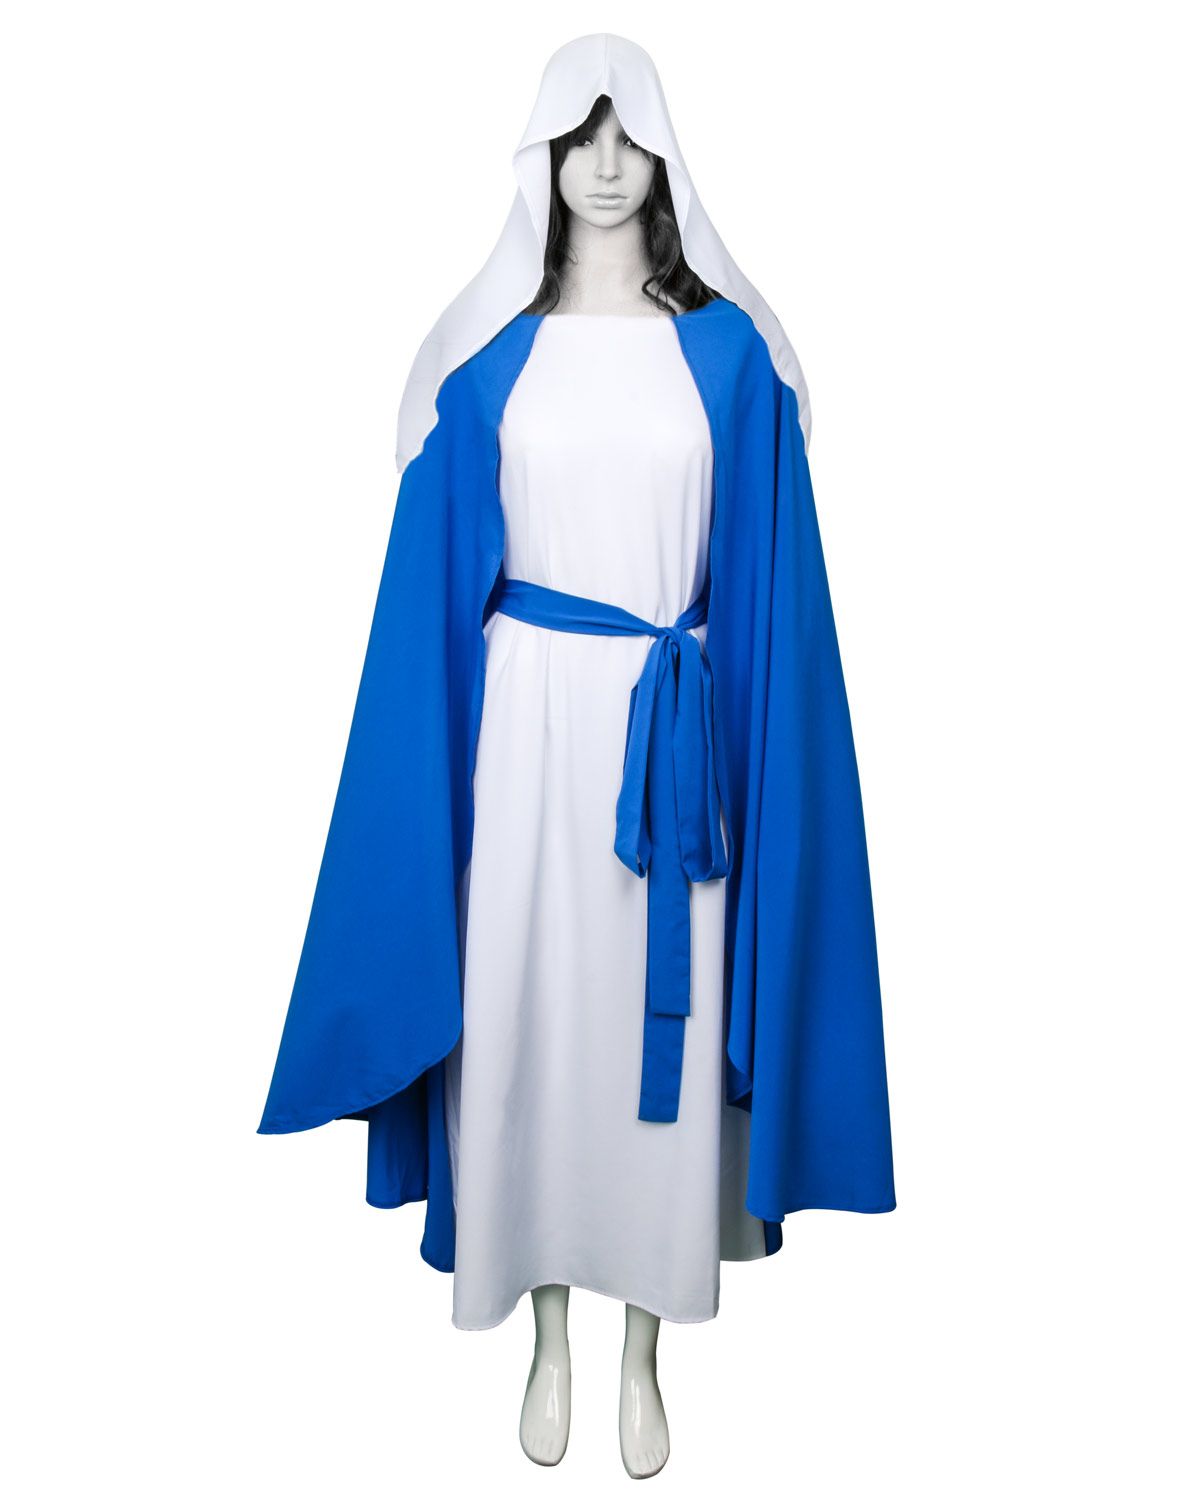 Virgin Mary Cosplay Dress and Cloak The Madonna Costume